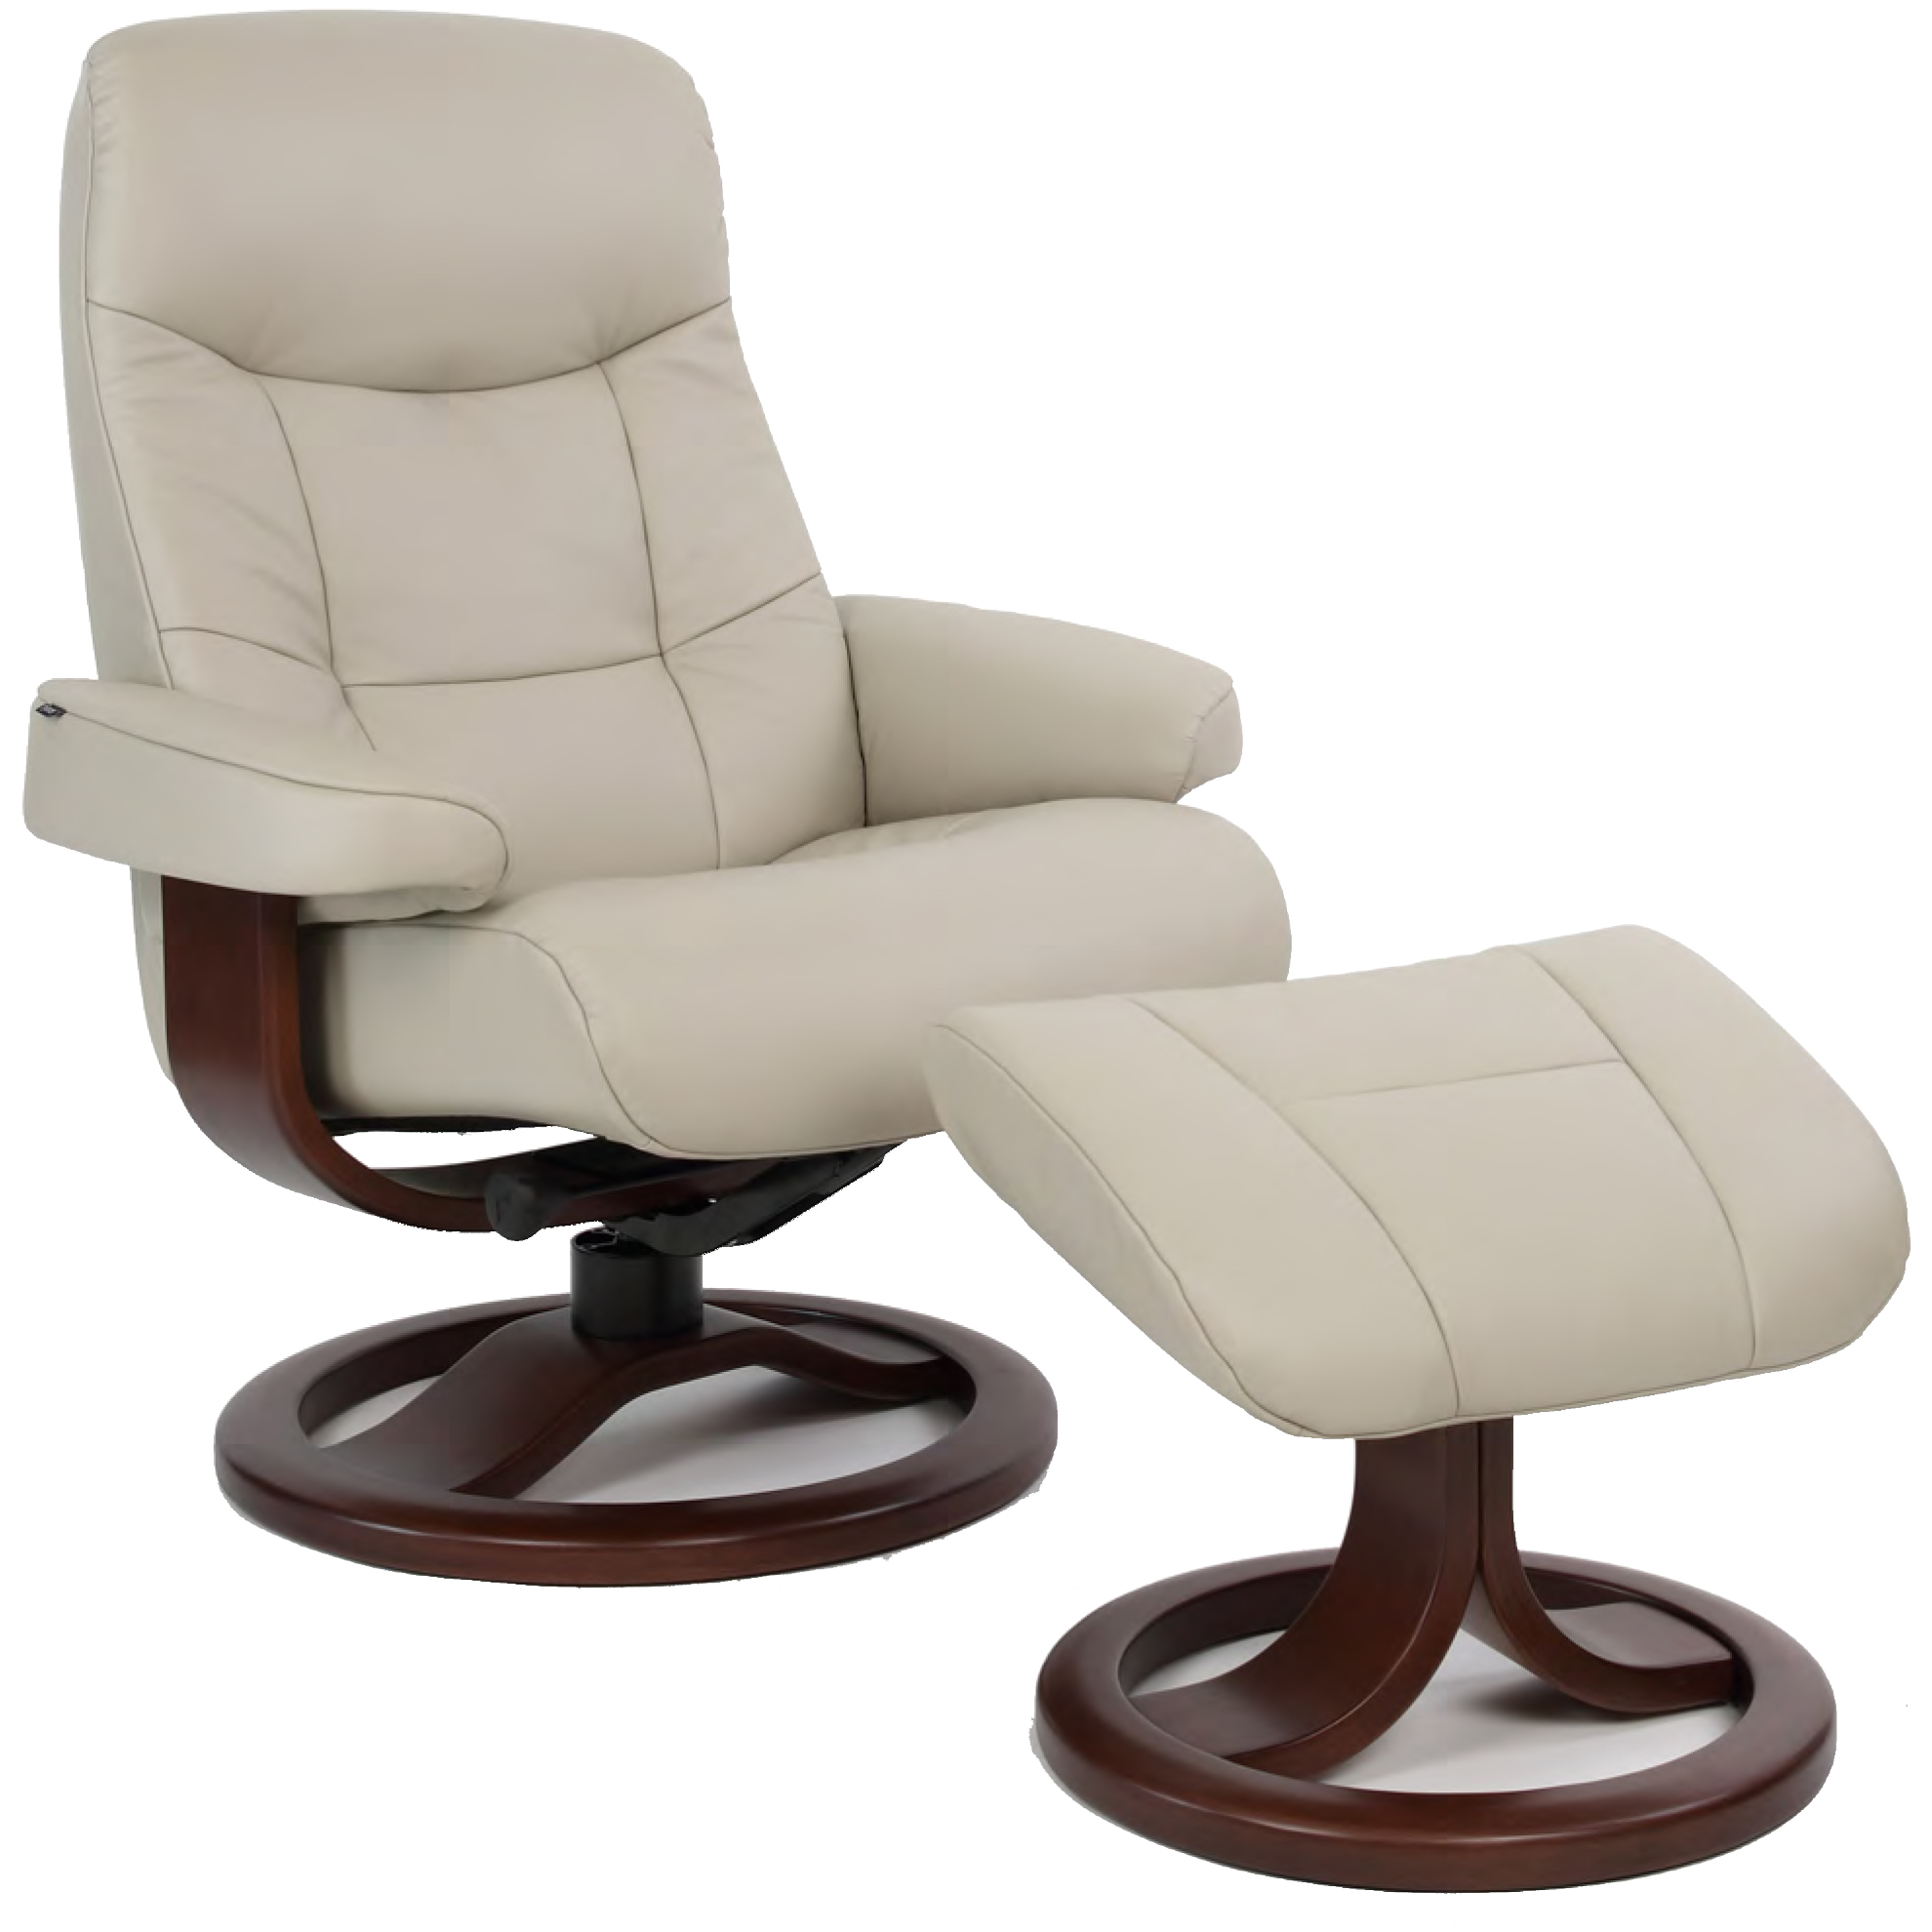 Fjords 215 Muldal Ergonomic Leather Recliner Chair + Ottoman